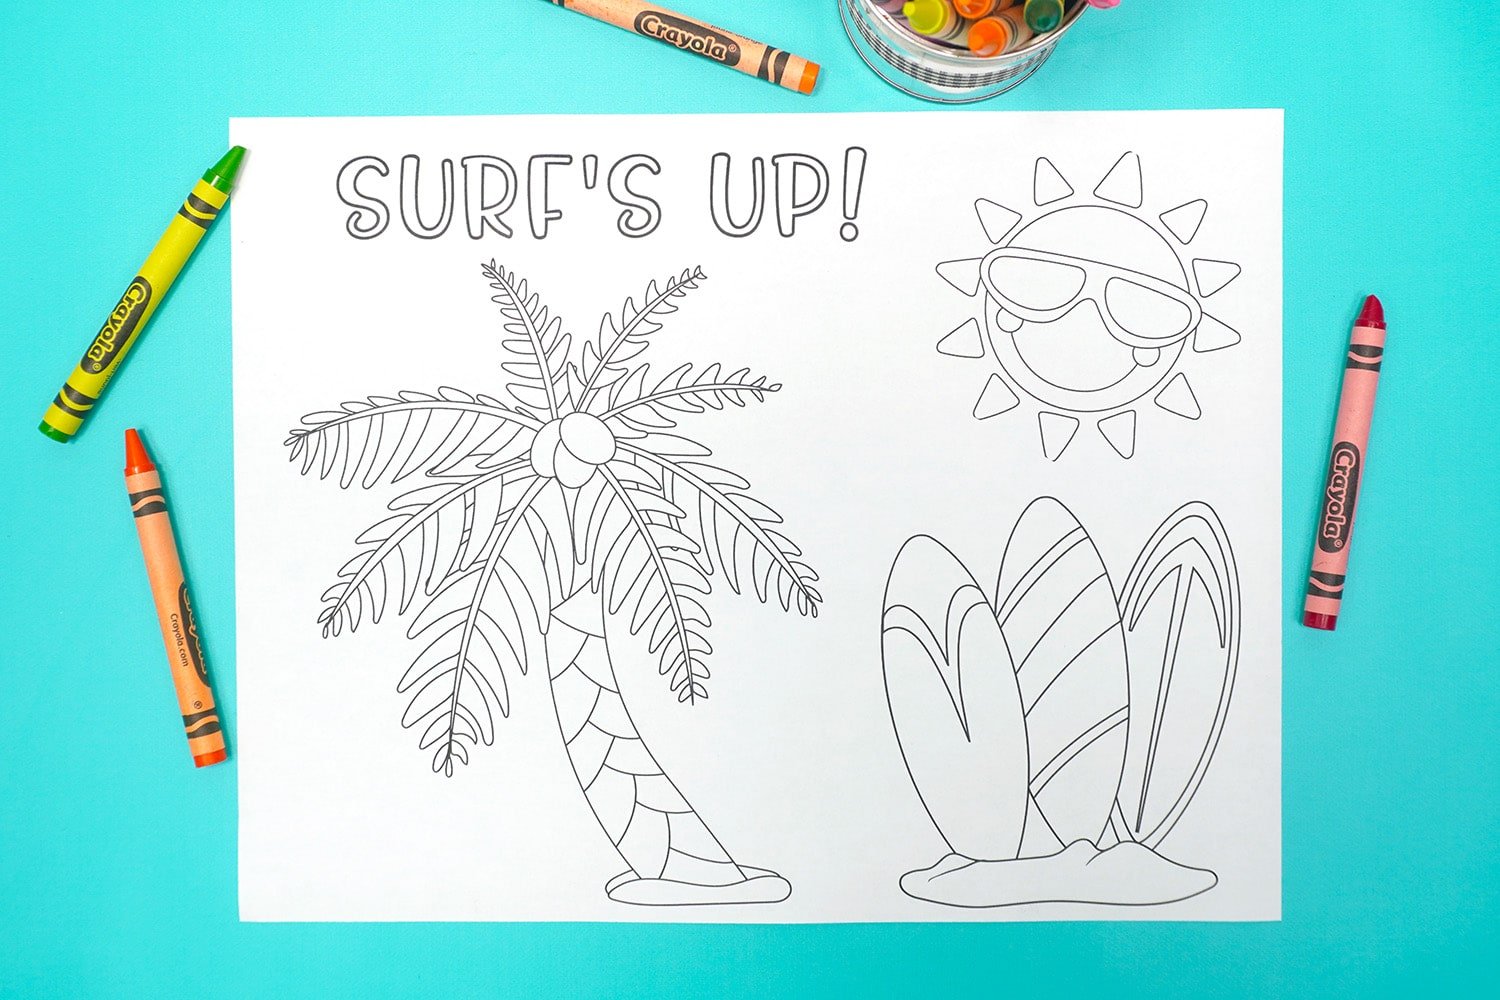 "Surf's Up!" Coloring Page on aqua background with crayons